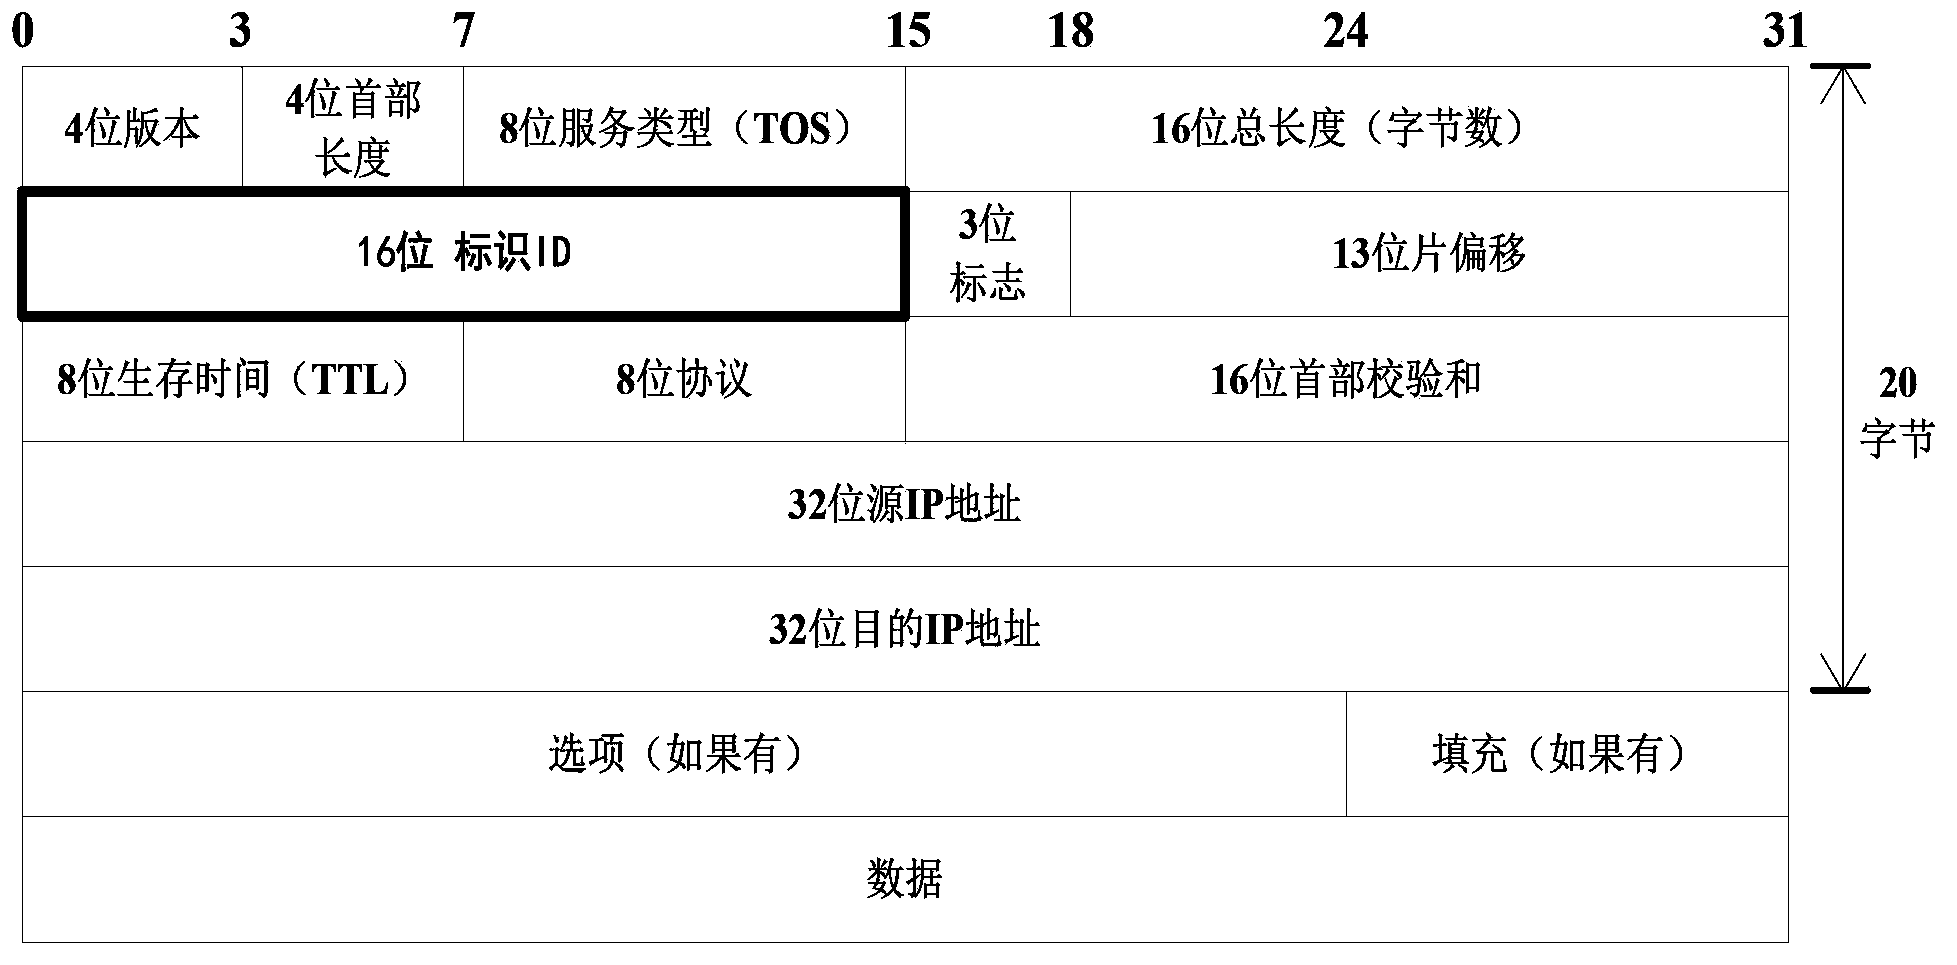 Method using multi-dimensional feature vectors to detect IP ID covert channel